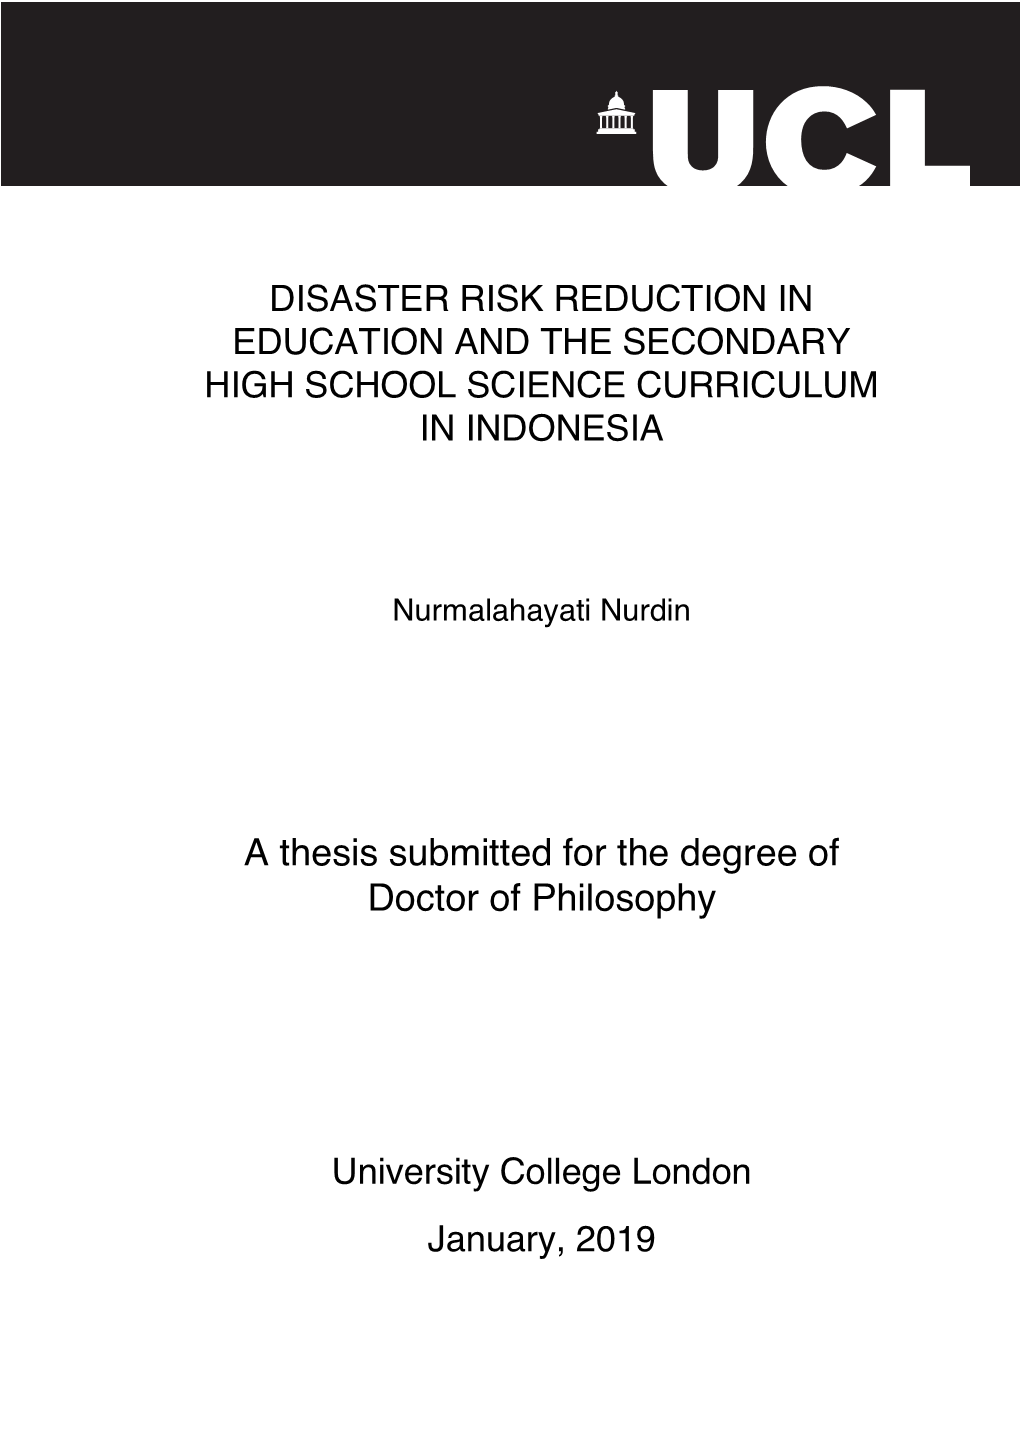 Disaster Risk Reduction in Education and the Secondary High School Science Curriculum in Indonesia